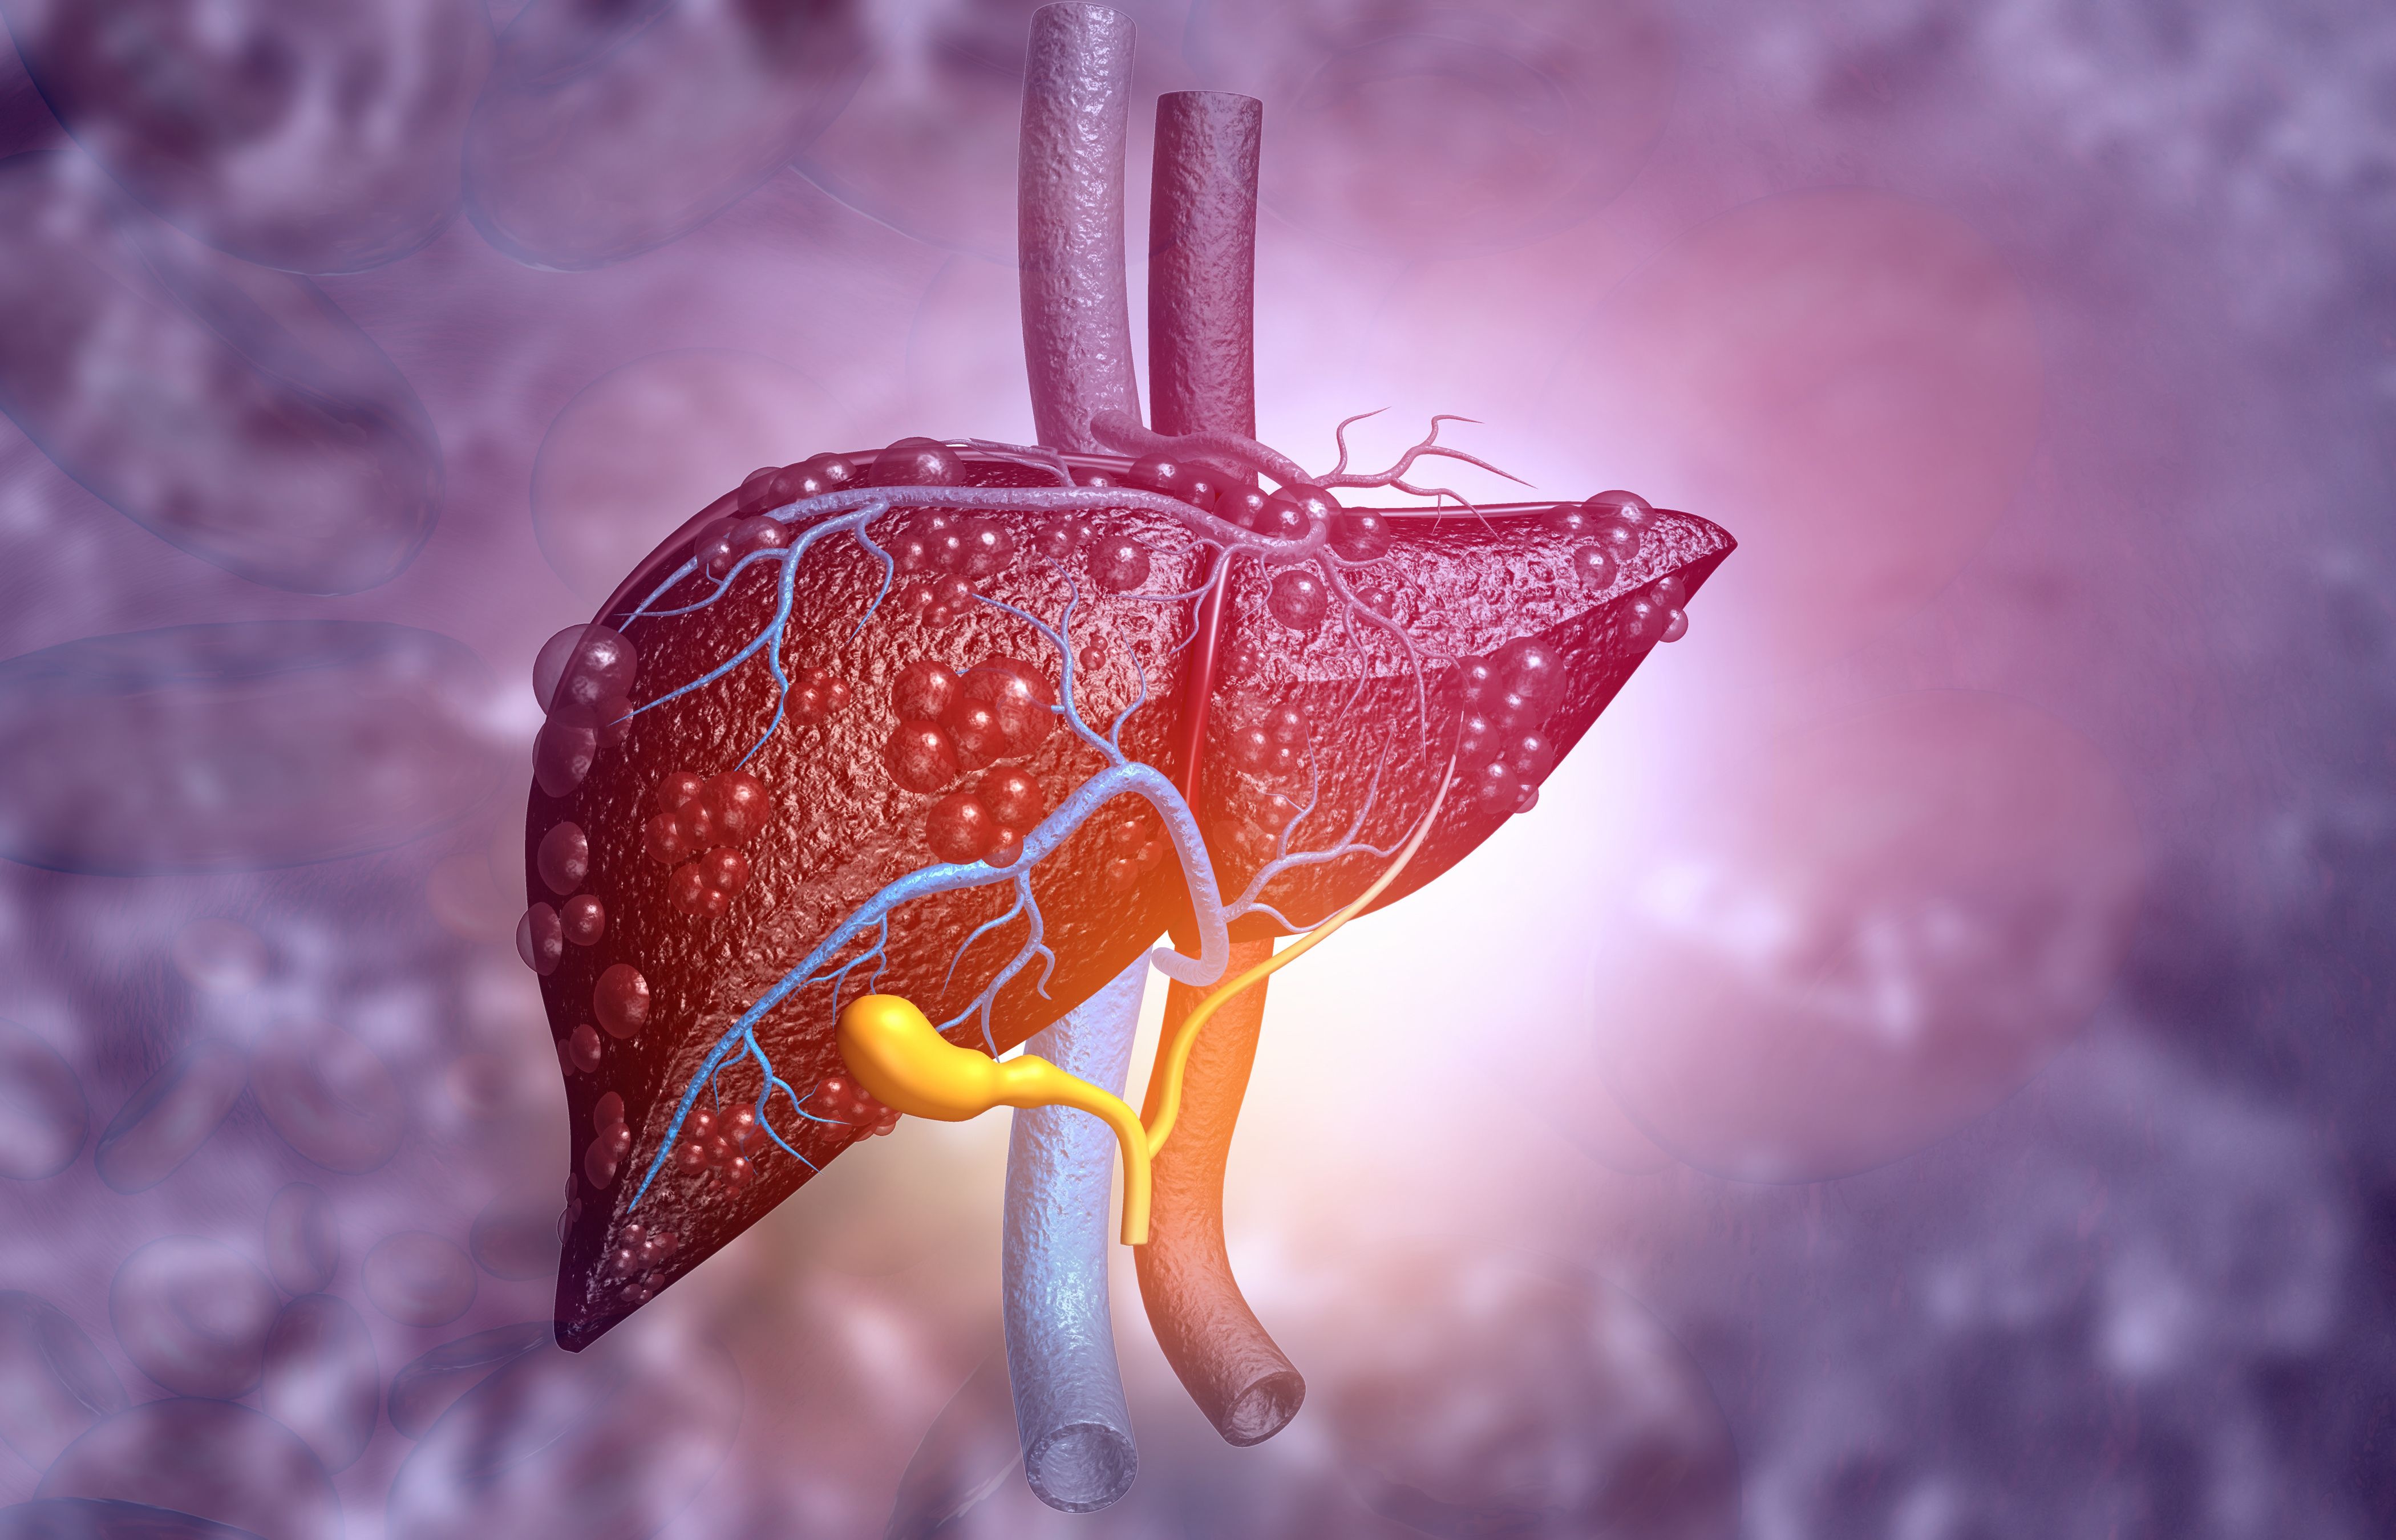 A long-term Baltimore study found receiving hepatitis C treatment significantly reduced the risk of liver disease and death in people who inject drugs.